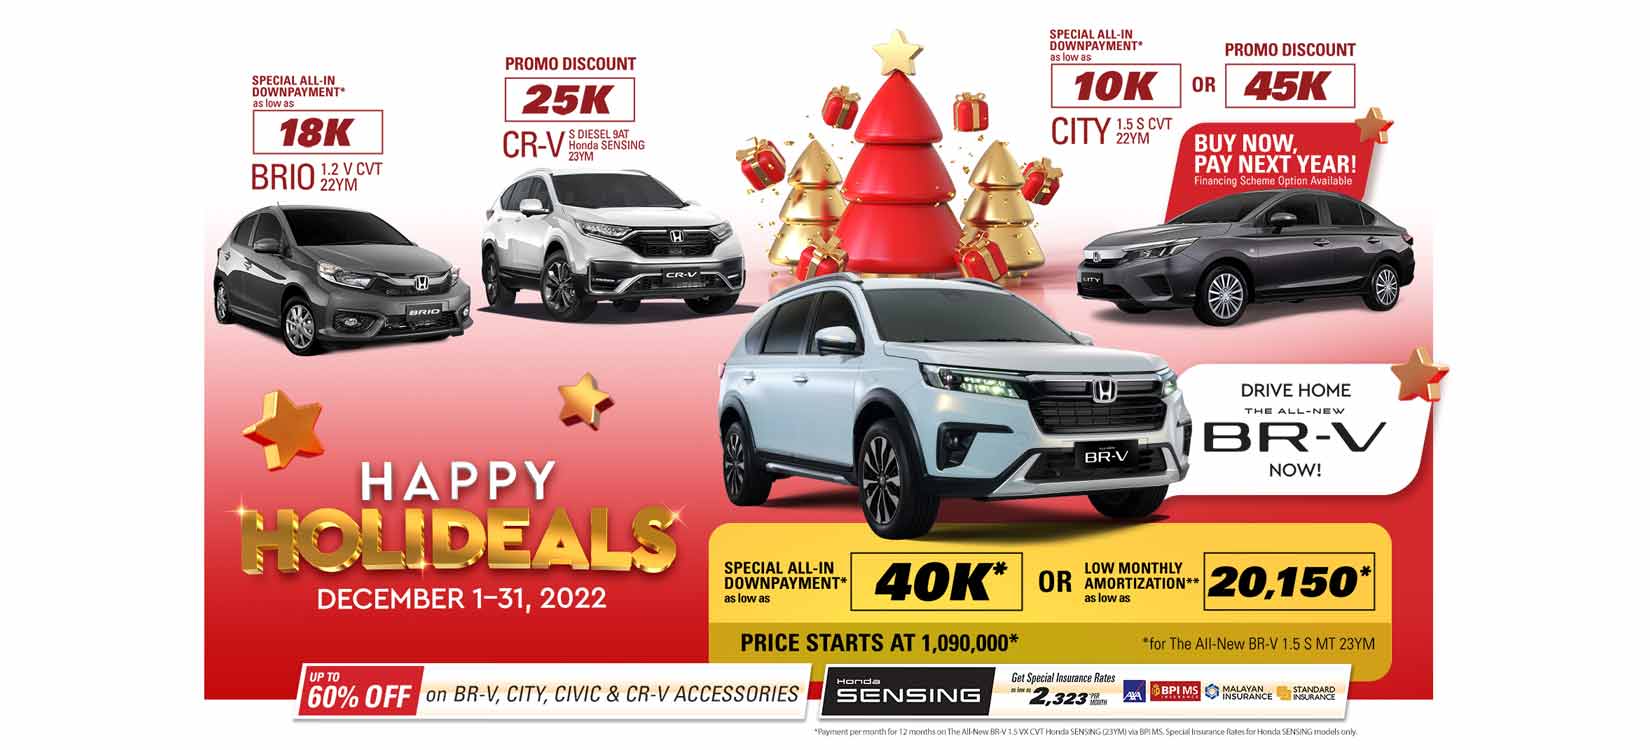 Celebrate Christmas with Honda Cars’ extended “Happy Holideals” promo